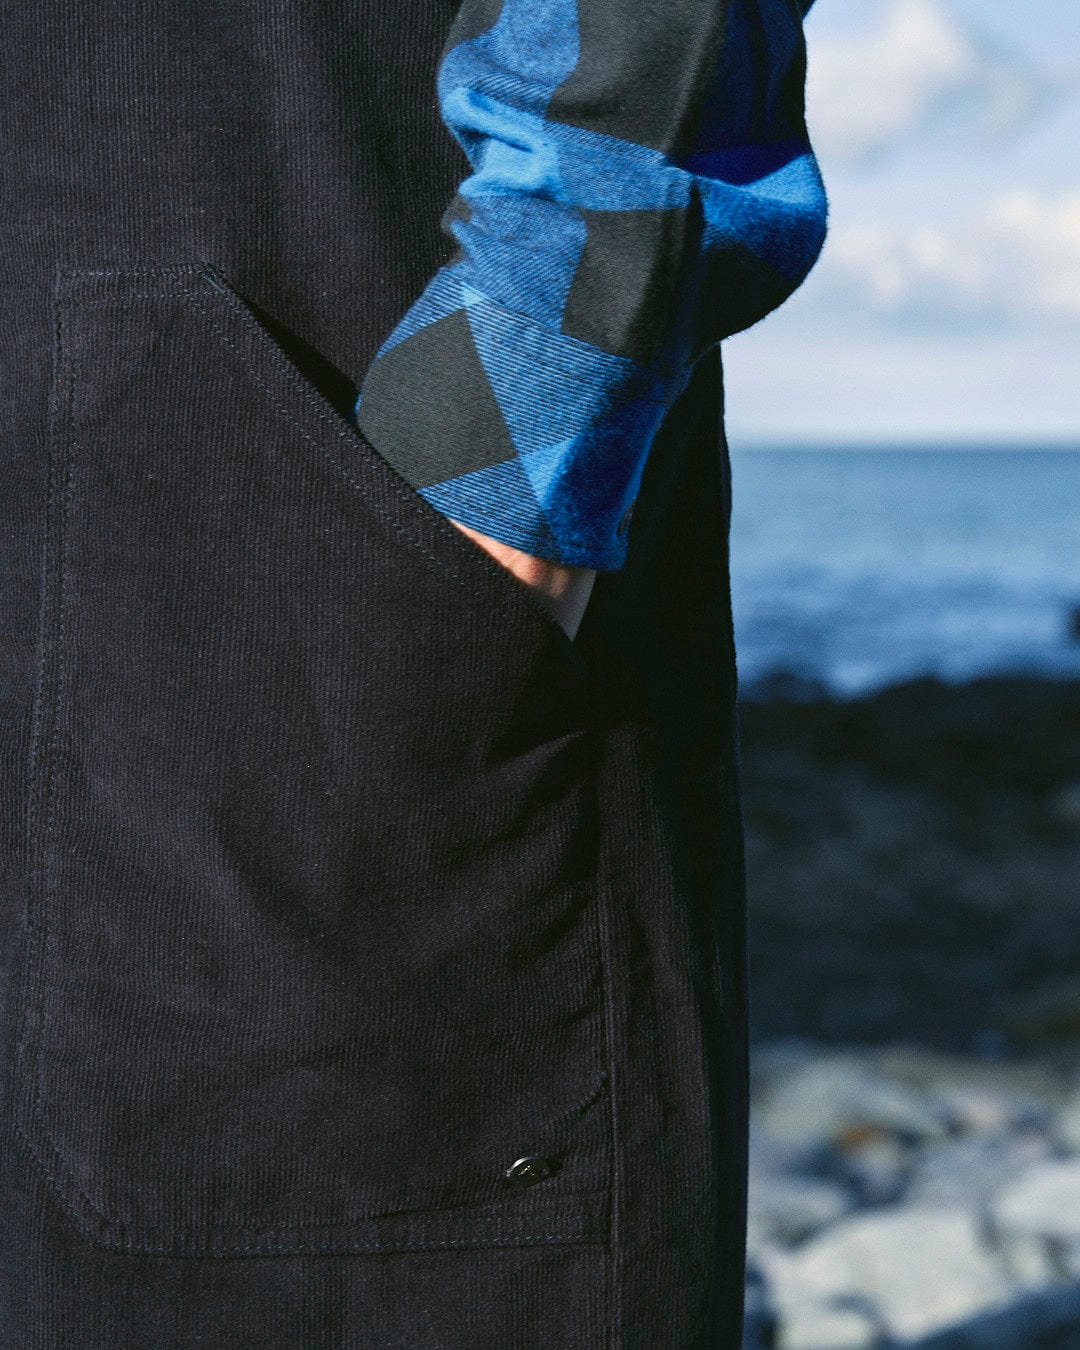 Close-up of a fashion-conscious woman wearing a blue and black checkered shirt with one hand in the pocket of her Saltrock Nancy - Womens Cord Jumpsuit - Dark Blue, standing near a rocky shoreline with the ocean in the background.